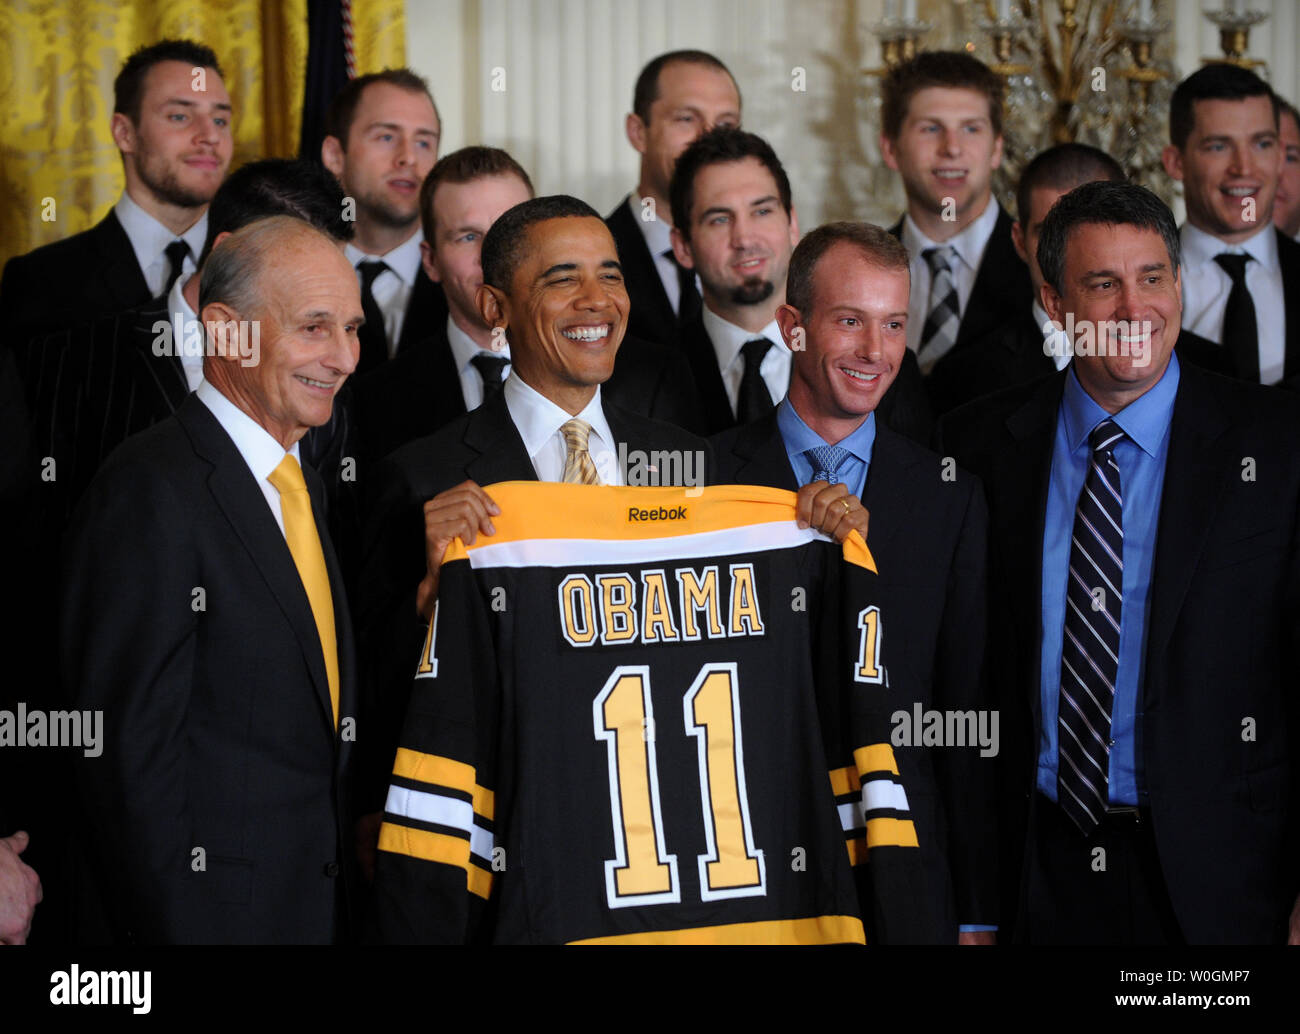 Obama honors Stanley Cup champion Boston Bruins